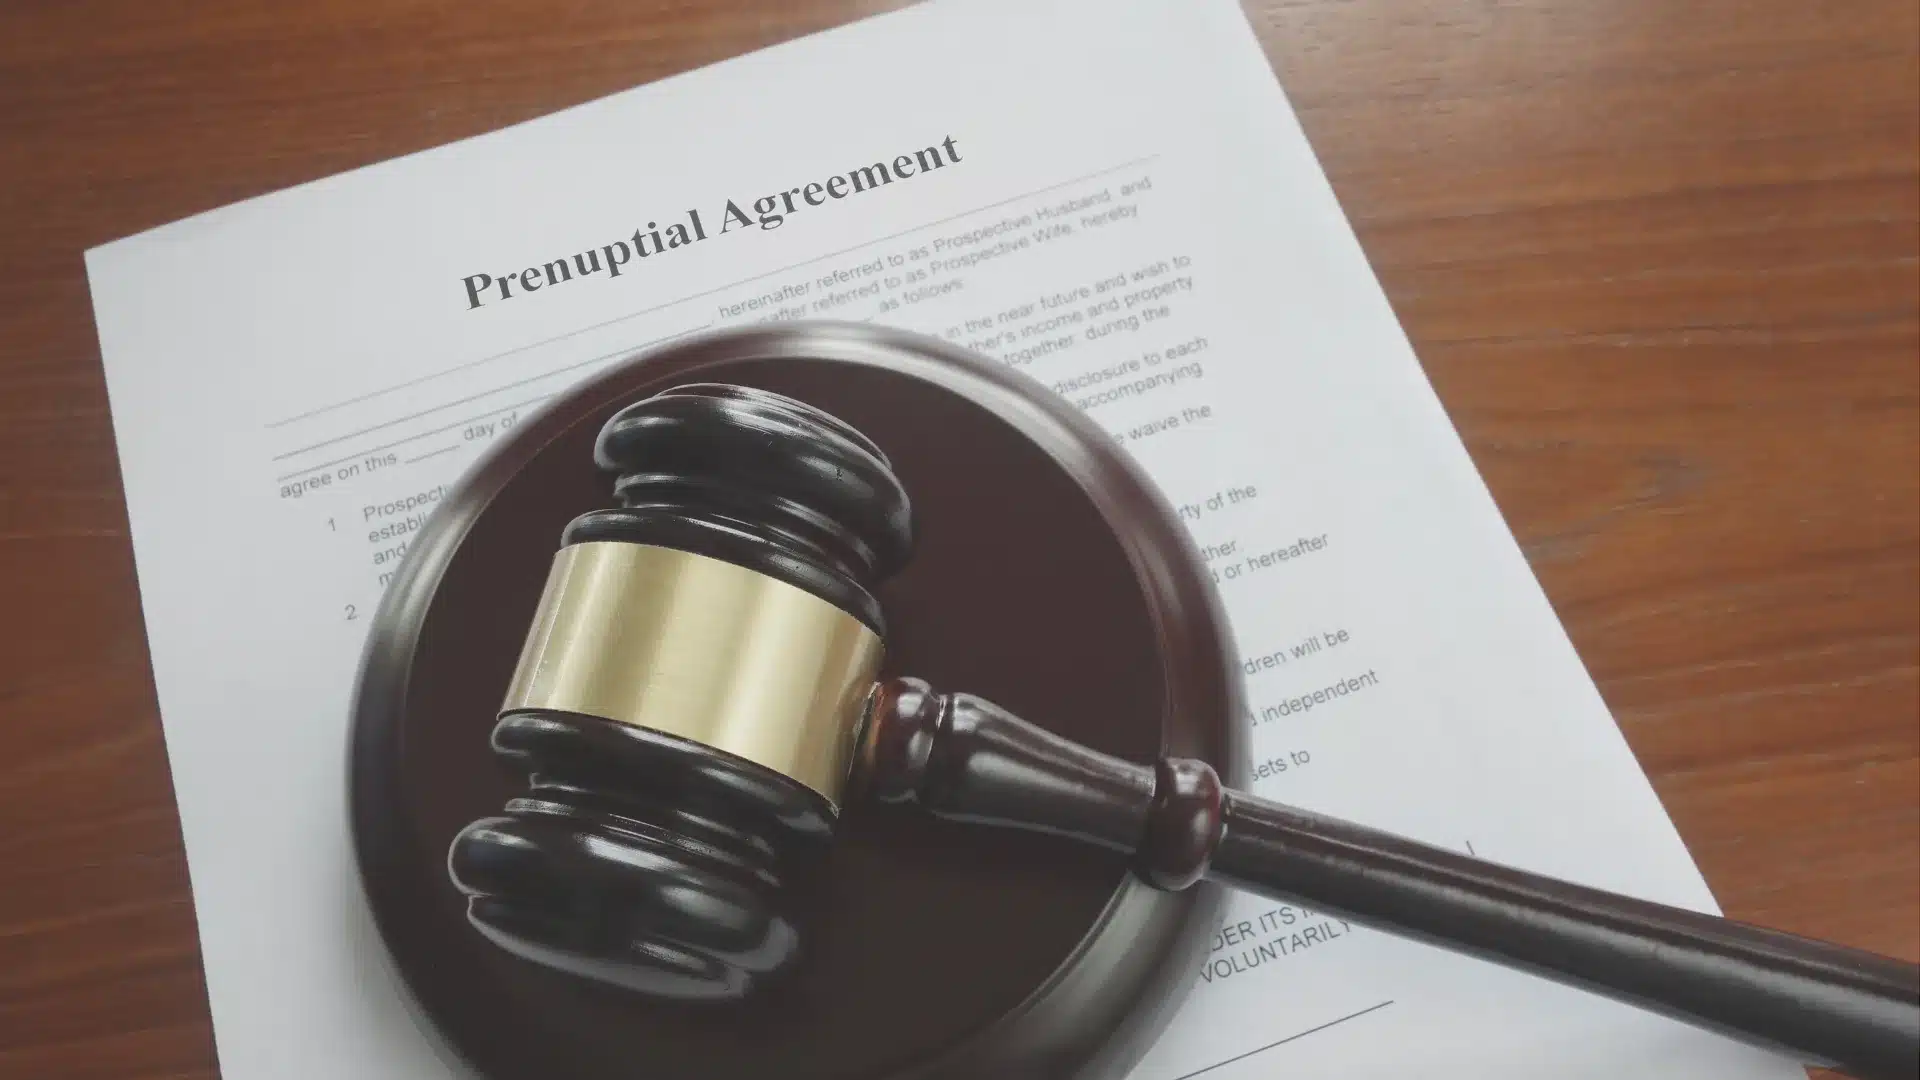 A prenuptial agreement being decided in court